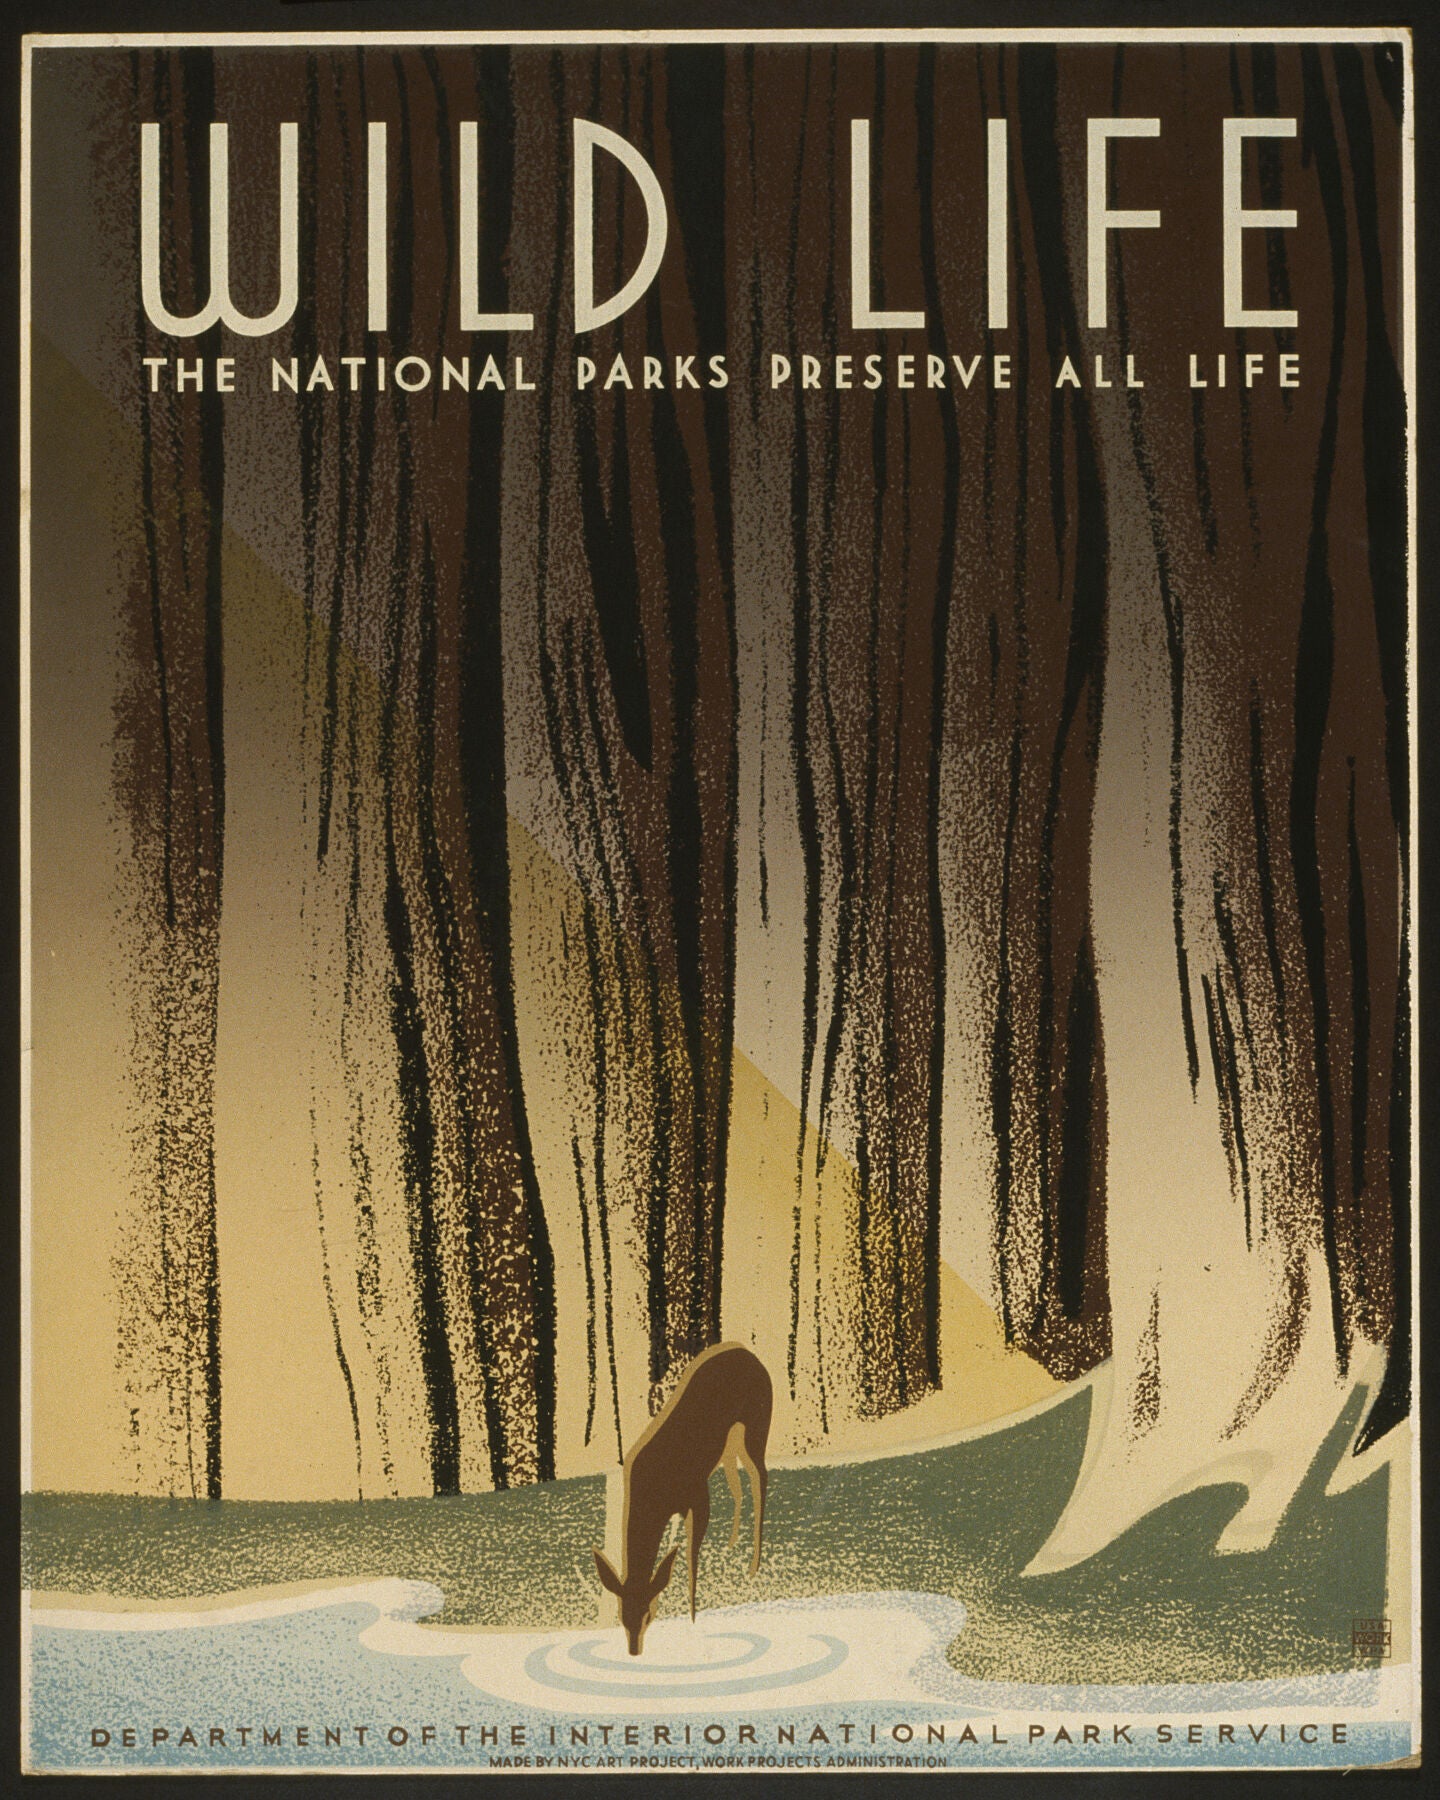 Poster for National Park Service, showing a deer drinking from a stream in the forest. c